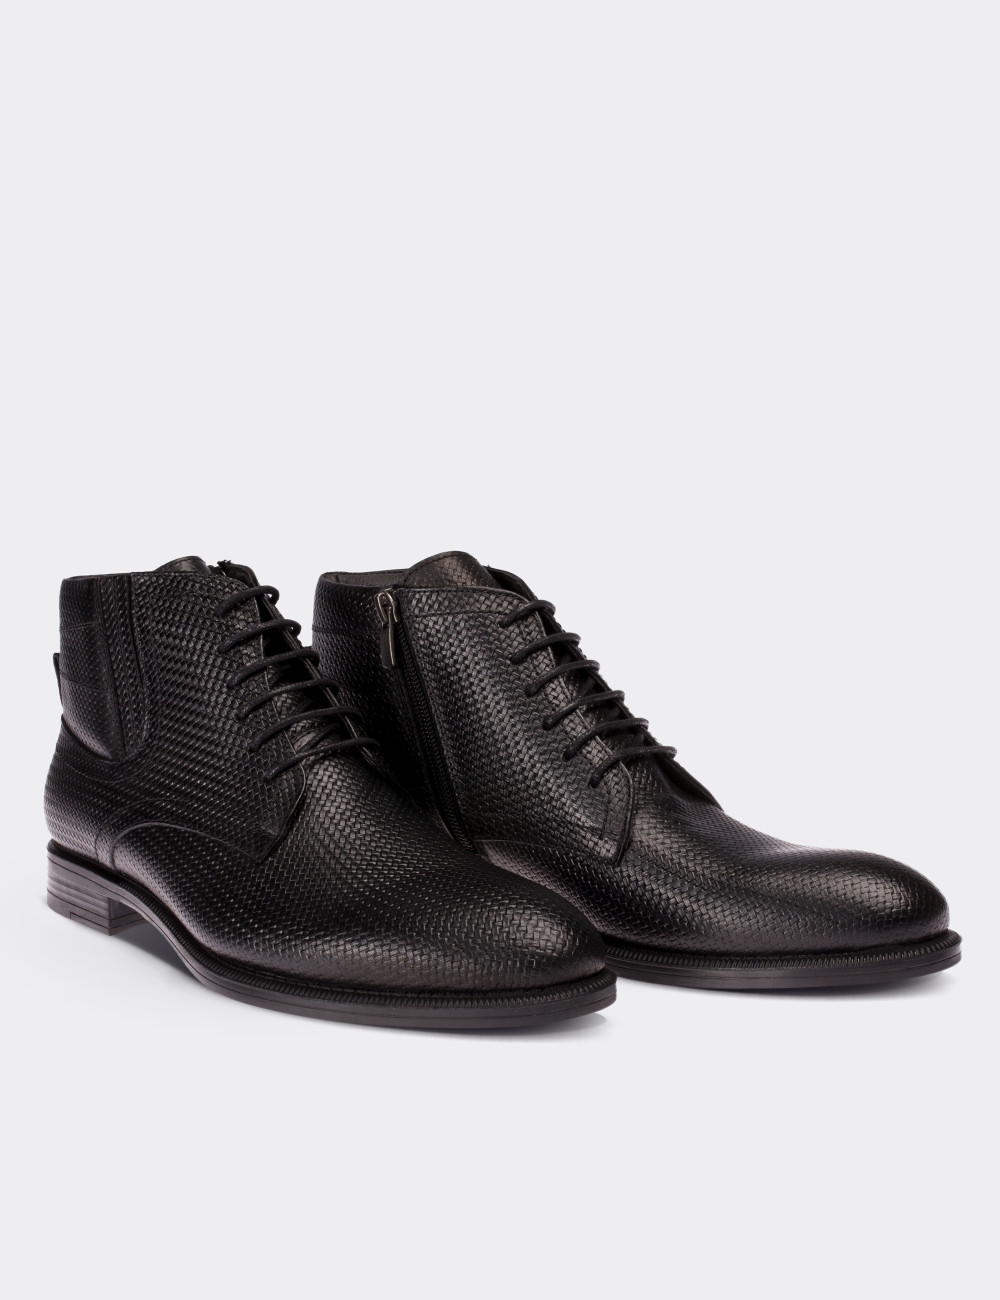 Black  Leather Boots - 01588MSYHC02